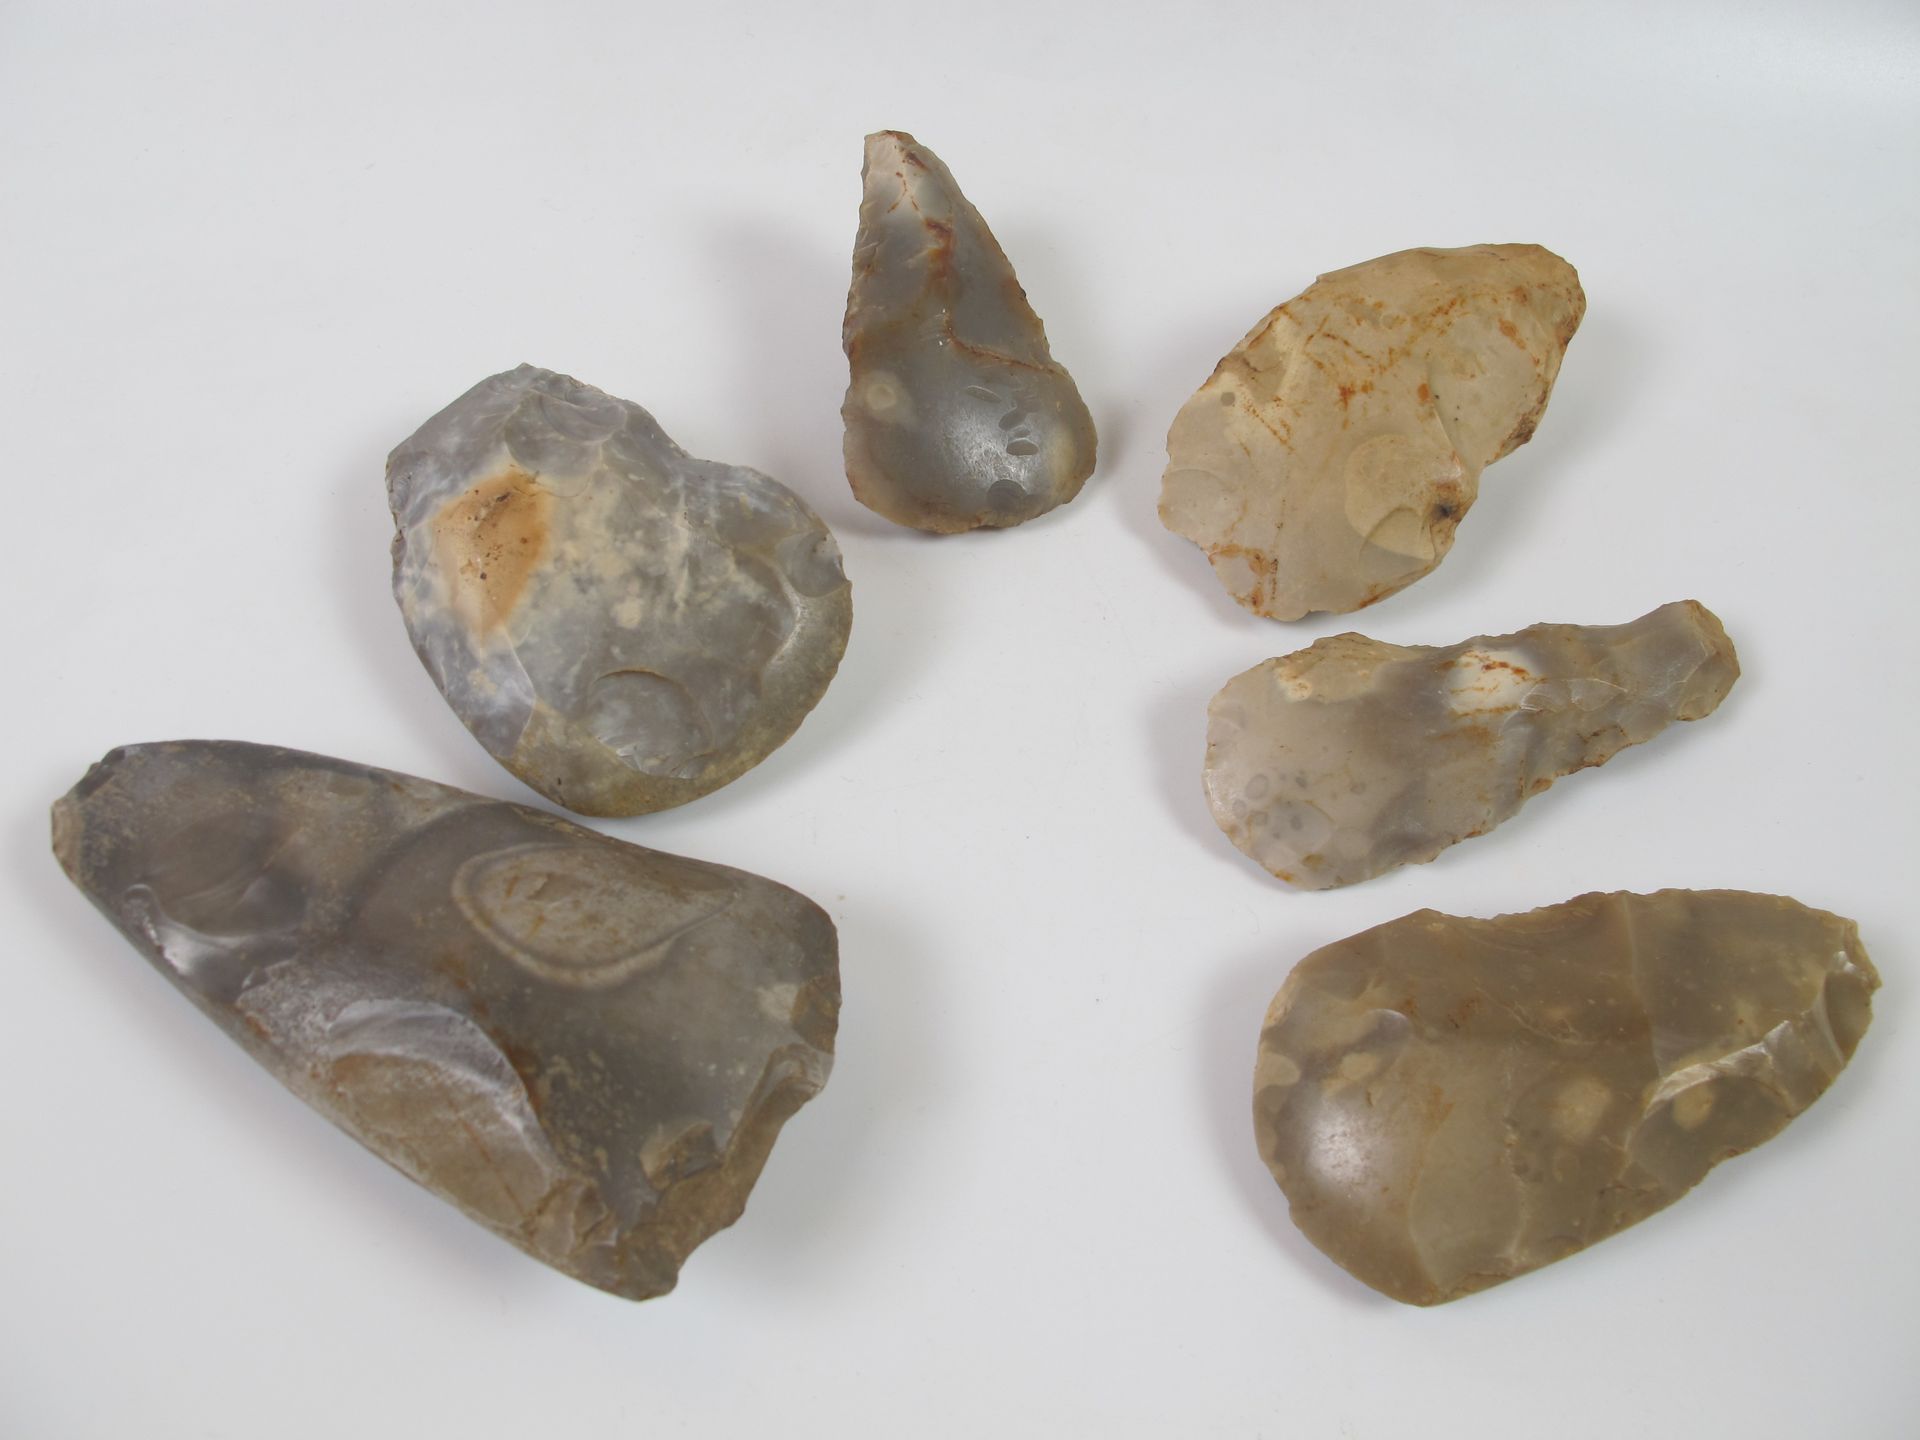 Null Six partially polished axes

Larger flint 11 cm

Neolithic